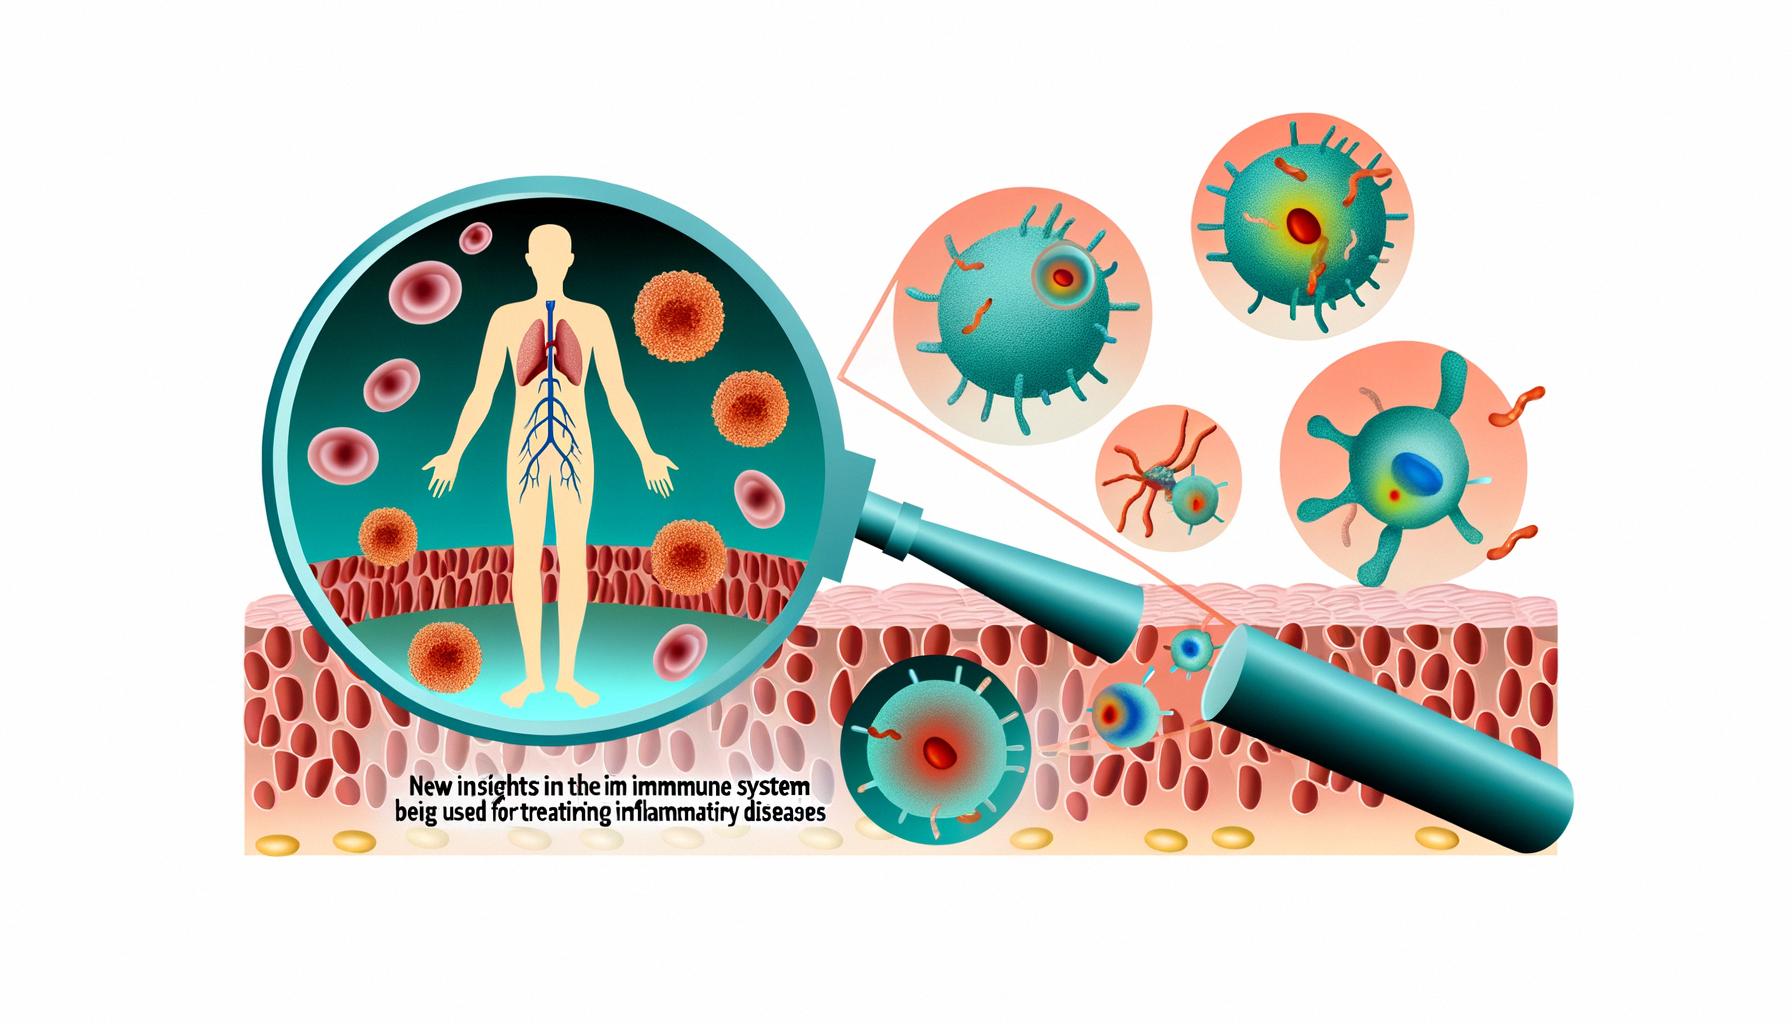 New immune system insights for treating inflammatory diseases